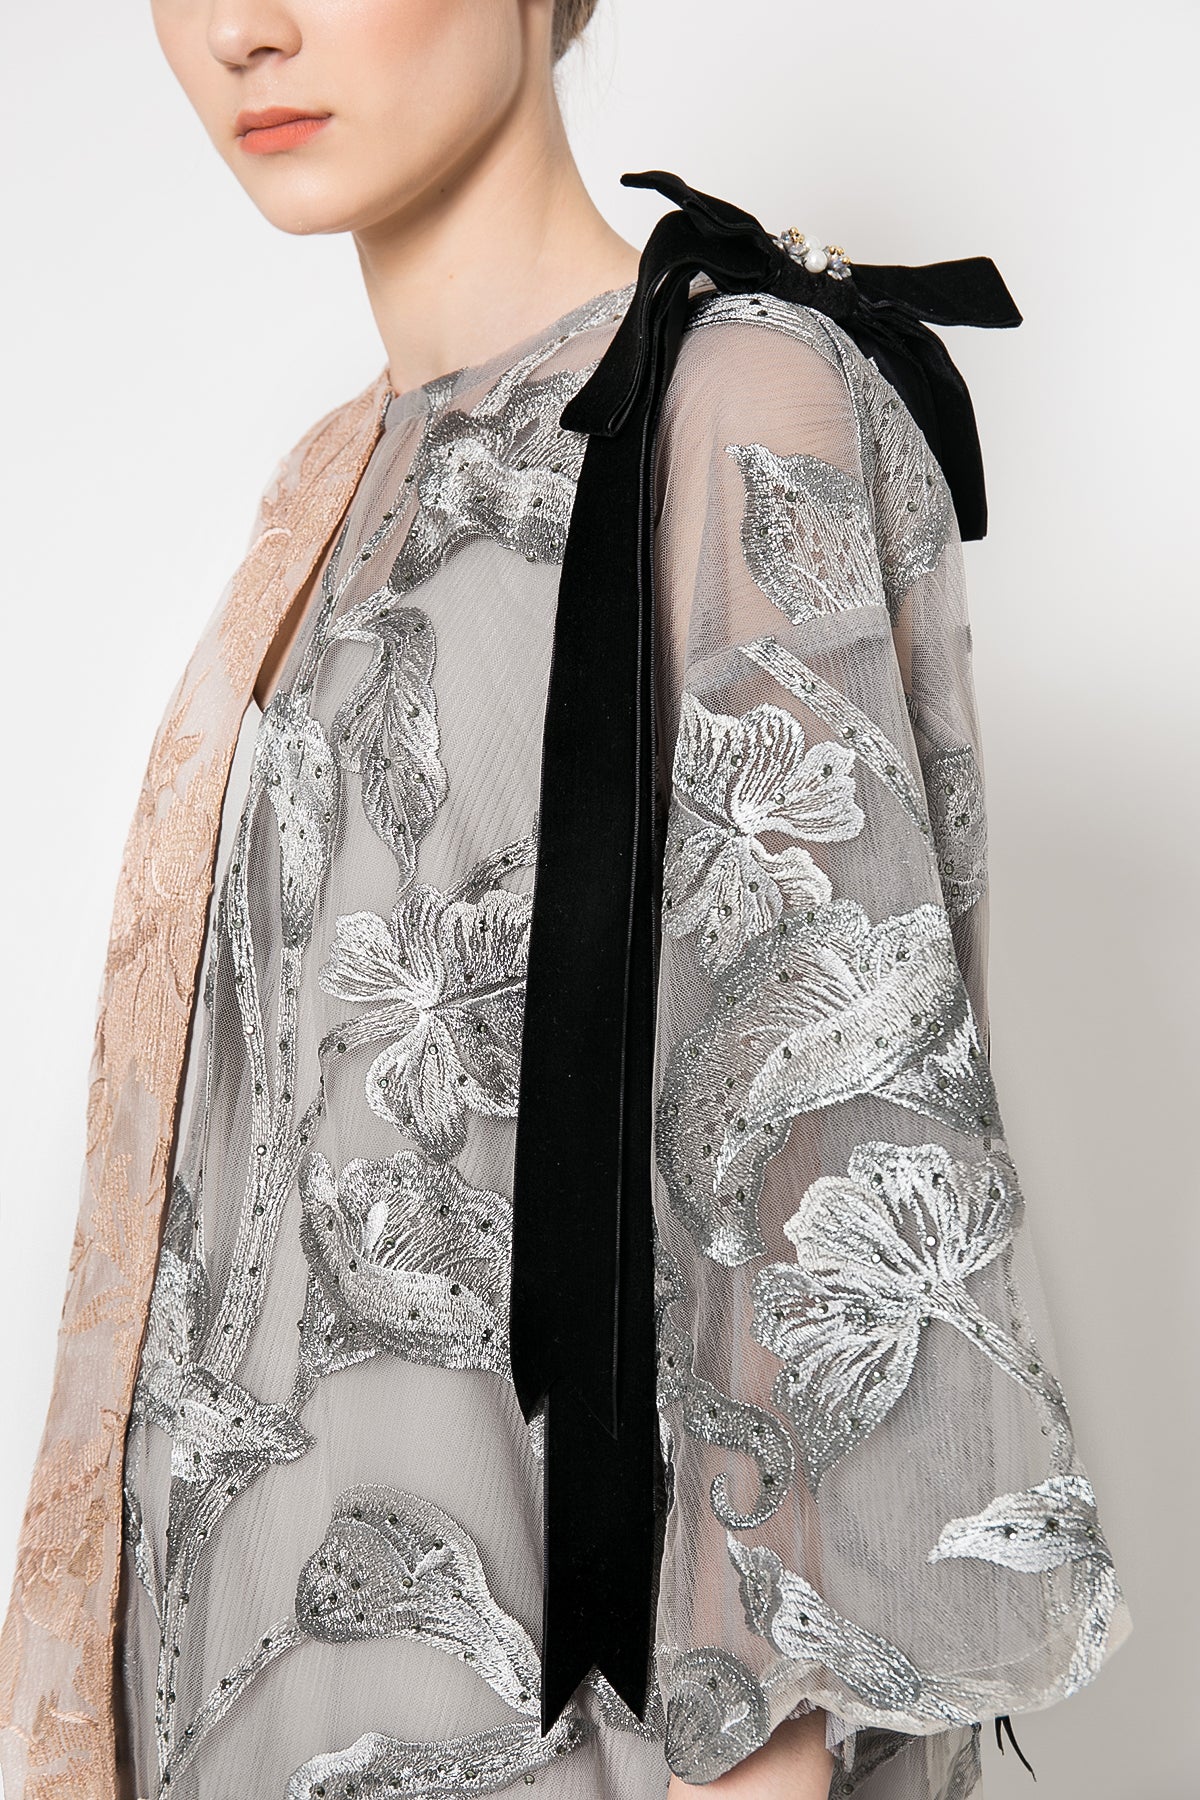 Colette Floral Embroidered Outer in Nudist Grey